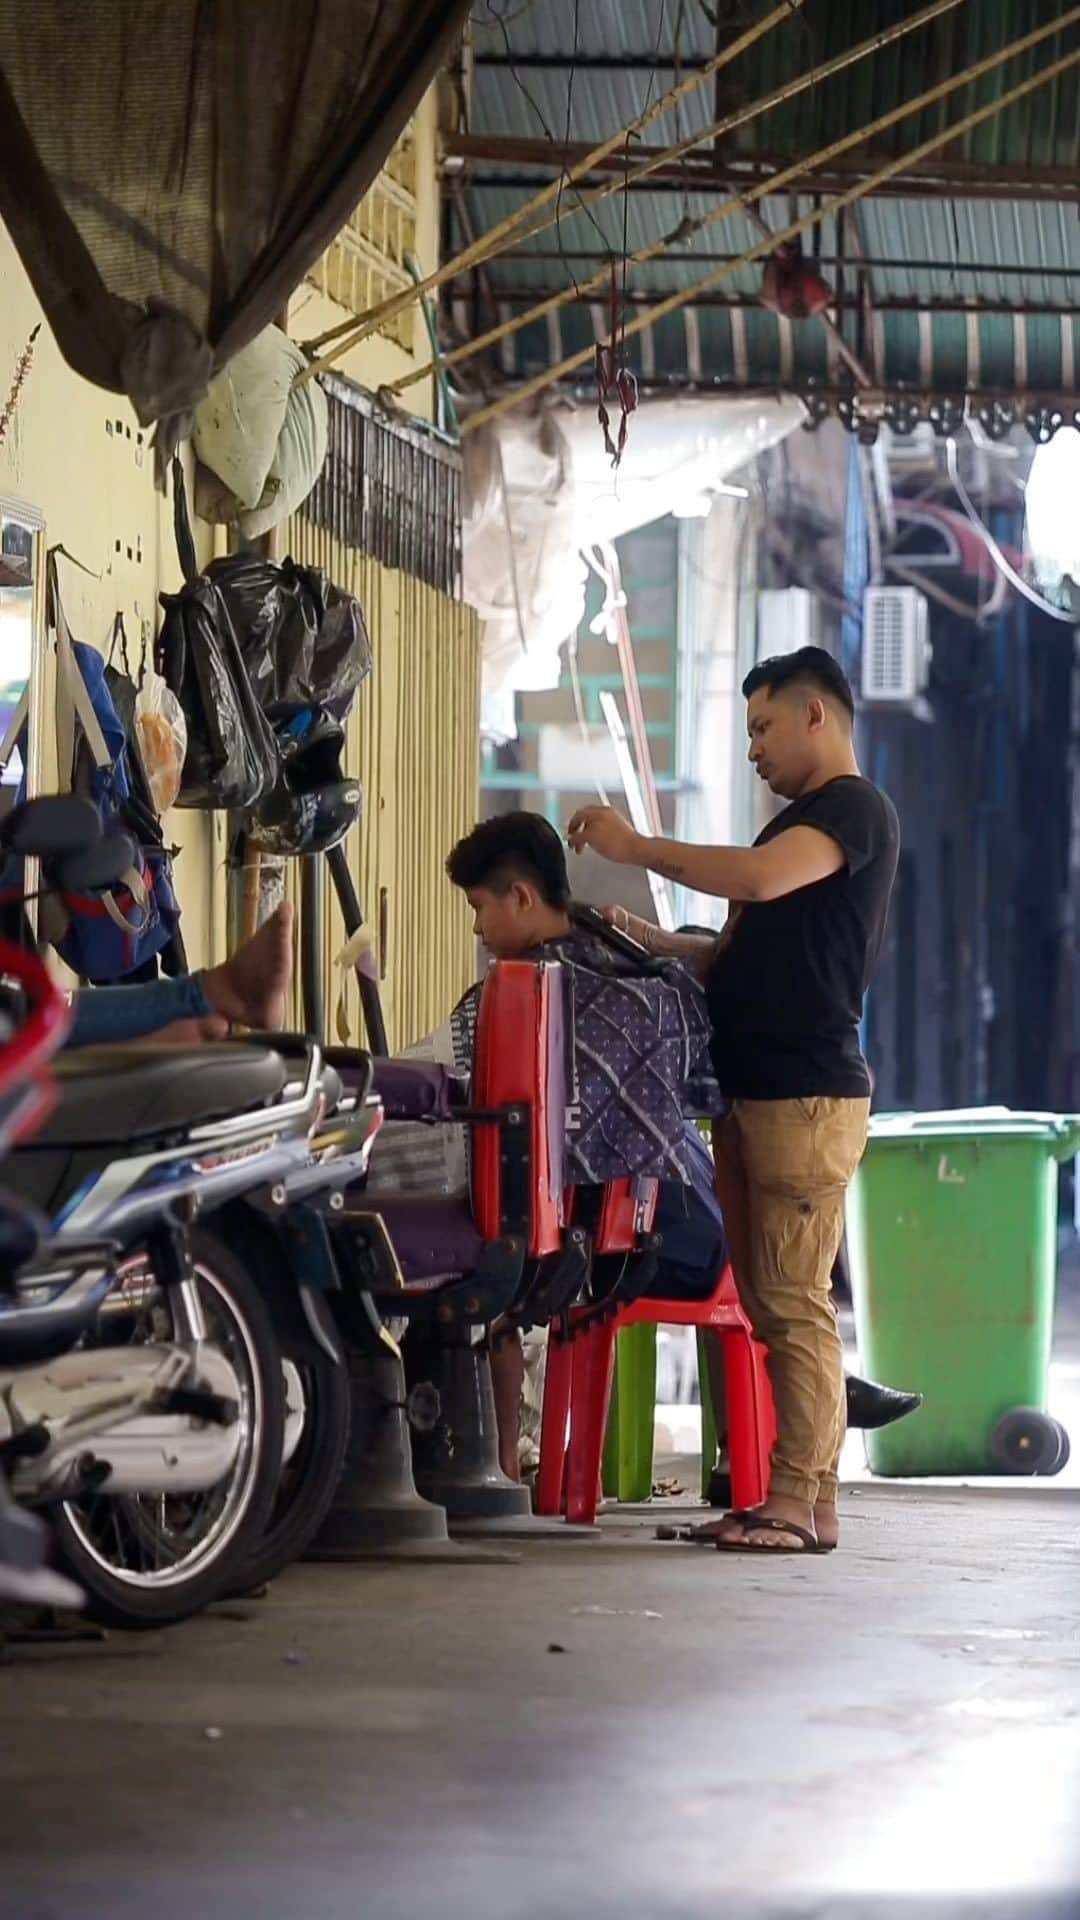 Shunsuke Miyatakeのインスタグラム：「A barber on the street of Phnom Penh /   It is almost impossible to see these street barbers on the street any more in Japan, but there are still many street barbers in Phnom Penh. Some go before working, others go before dinner with friends. From morning till late, we can see them at several places. Here is the street just one street south from the Orussey Market. I just wanted to document this everyday life scene which might vanish sooner or later as a community memory.   ---  プノンペンの路上理髪店　  日本ではほとんど見かけなくなった路上理髪店だが、プノンペンにはまだたくさんある。出勤前に行く人もいれば、友人との夕食前に行く人もいる。朝から晩まで、あちこちで見かける。こちらはオルセーマーケットから1本南の通り。いずれ消えてしまうかもしれないこの日常風景を、地域の思い出として記録しておきたかった。  . . . . #phnompenh #cambodia #cambodia🇰🇭 #cambodiatrip #cambodiatravel #cambodiatourism #phnompenhlife #phnompenh #phnompenhreels #reelvideo #reelinstagram #socialdocumentary #socialdocumentaryphotography #documentaryphotography #storyofthestreet #PhnomPenhPhotographyCollective」